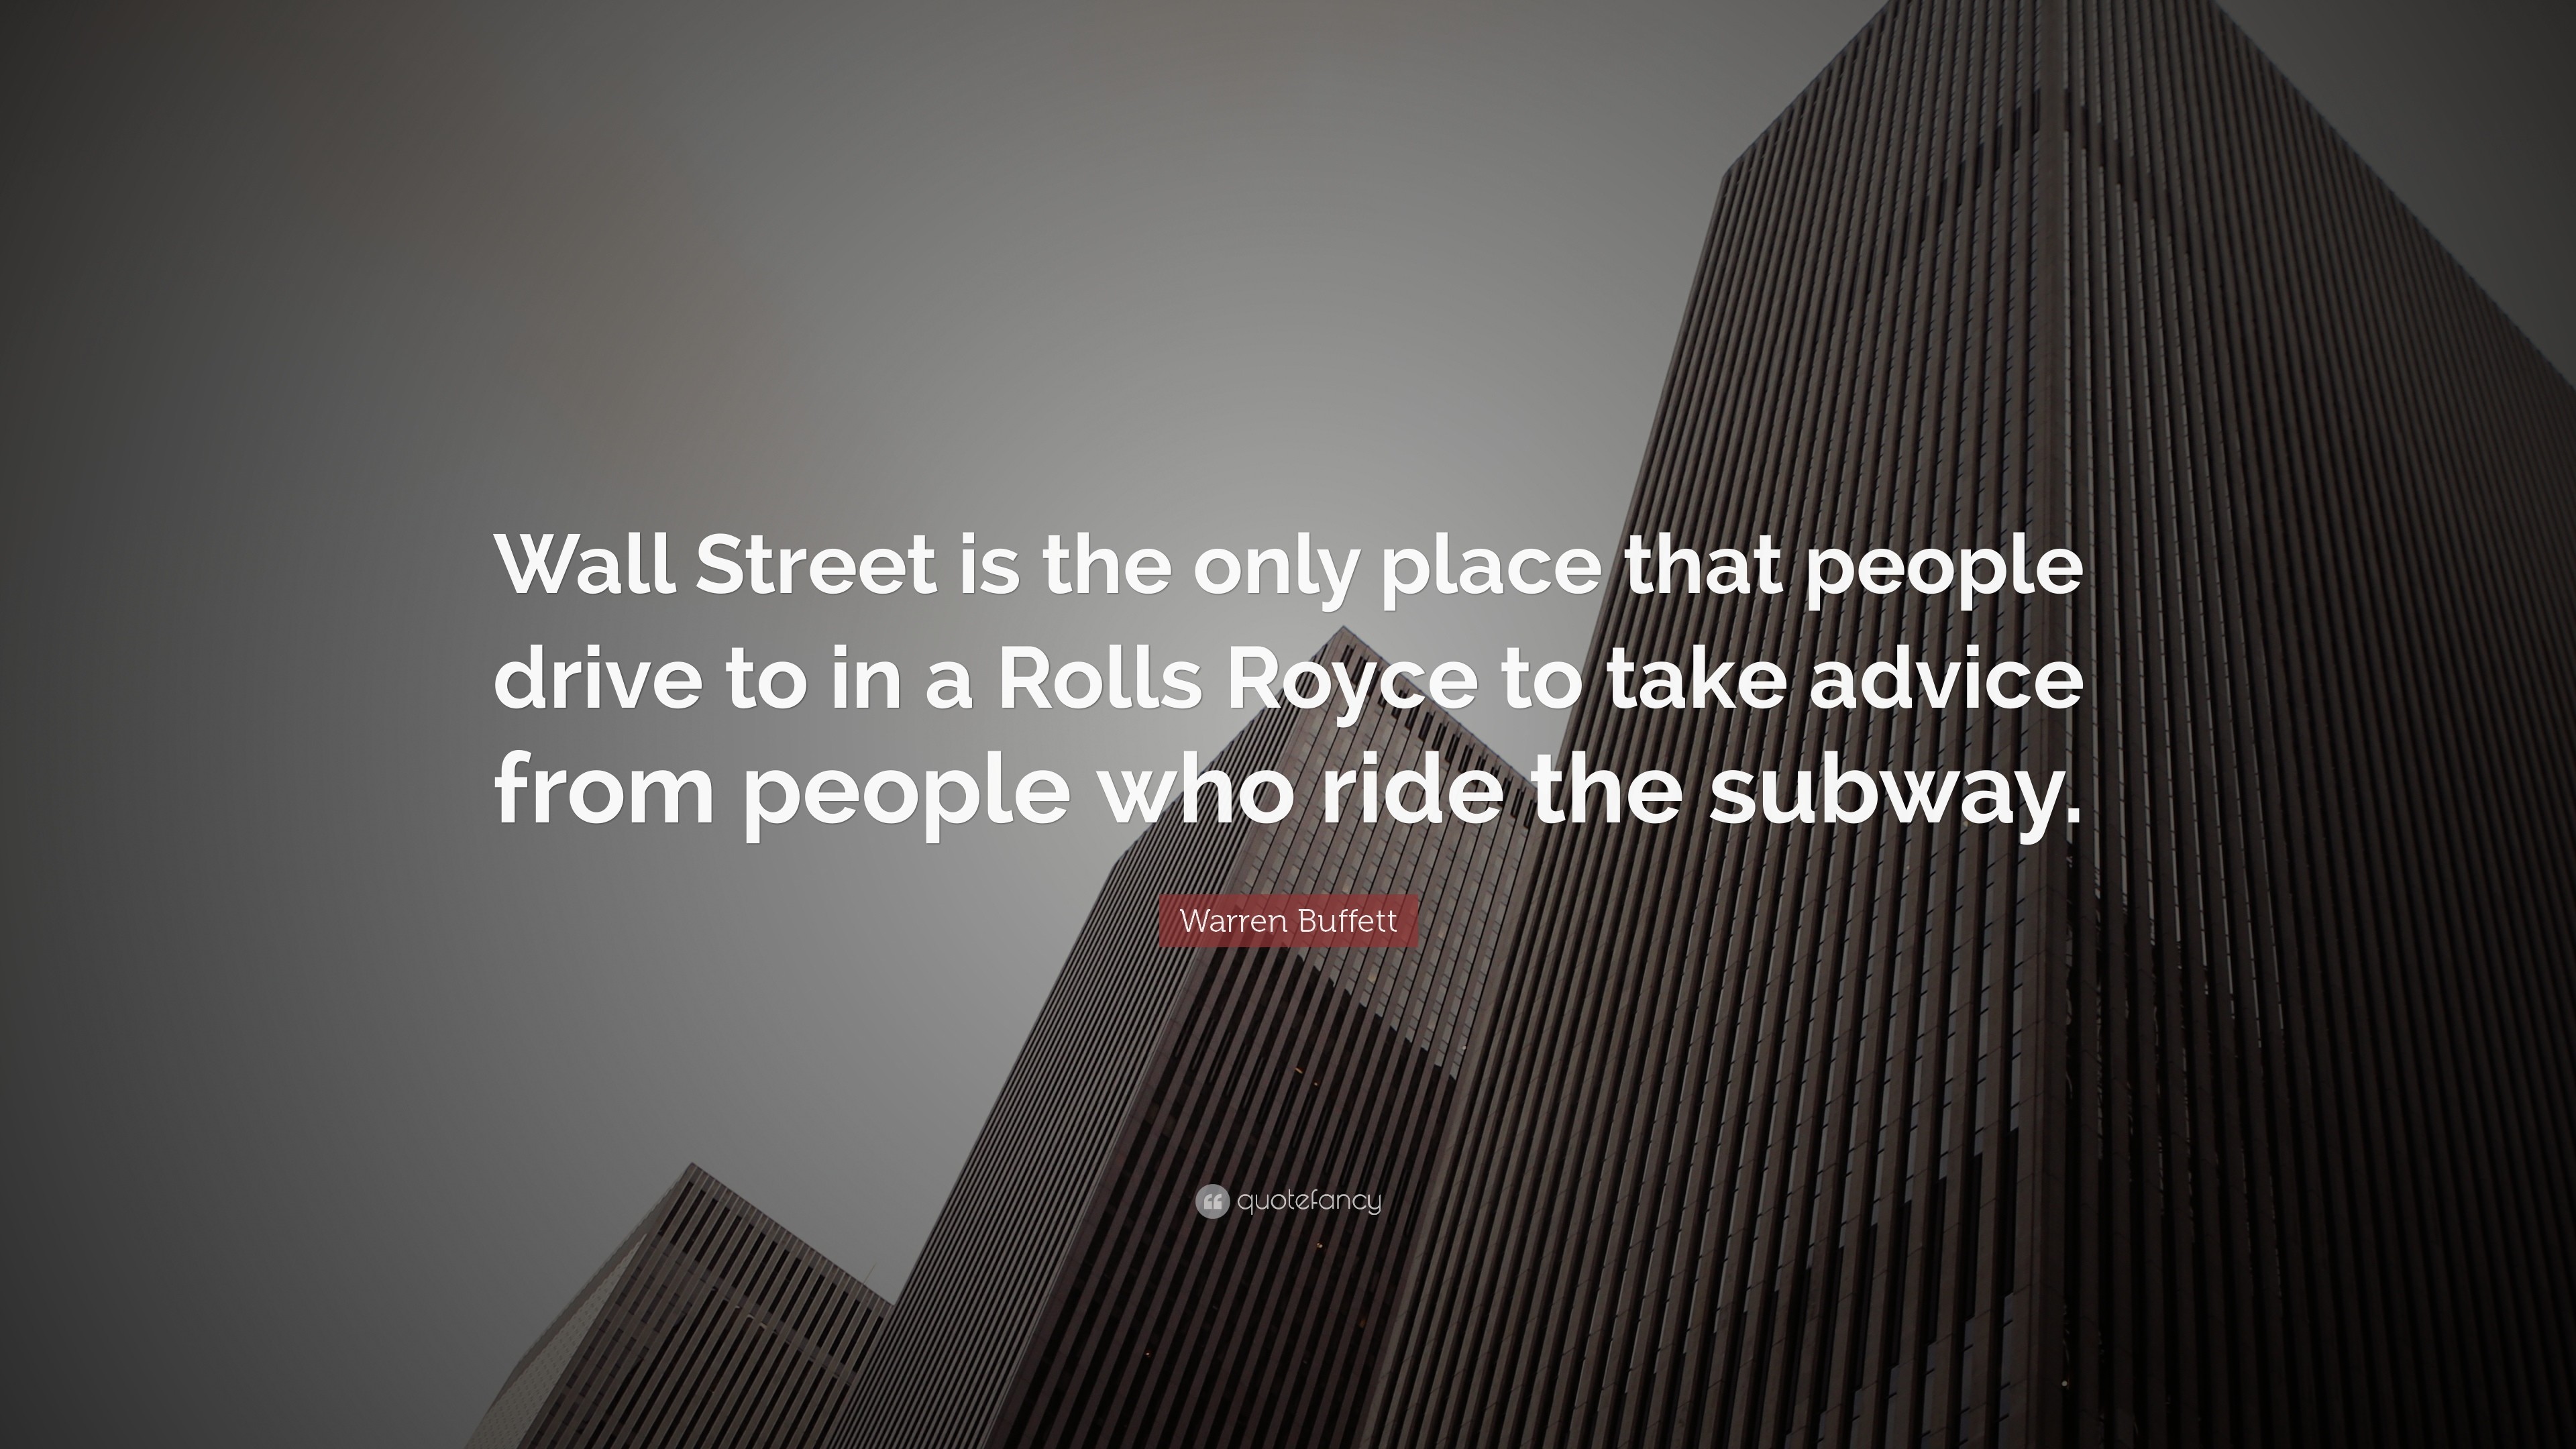 3840x2160 Warren Buffett Quote: “Wall Street is the only place that people drive to in